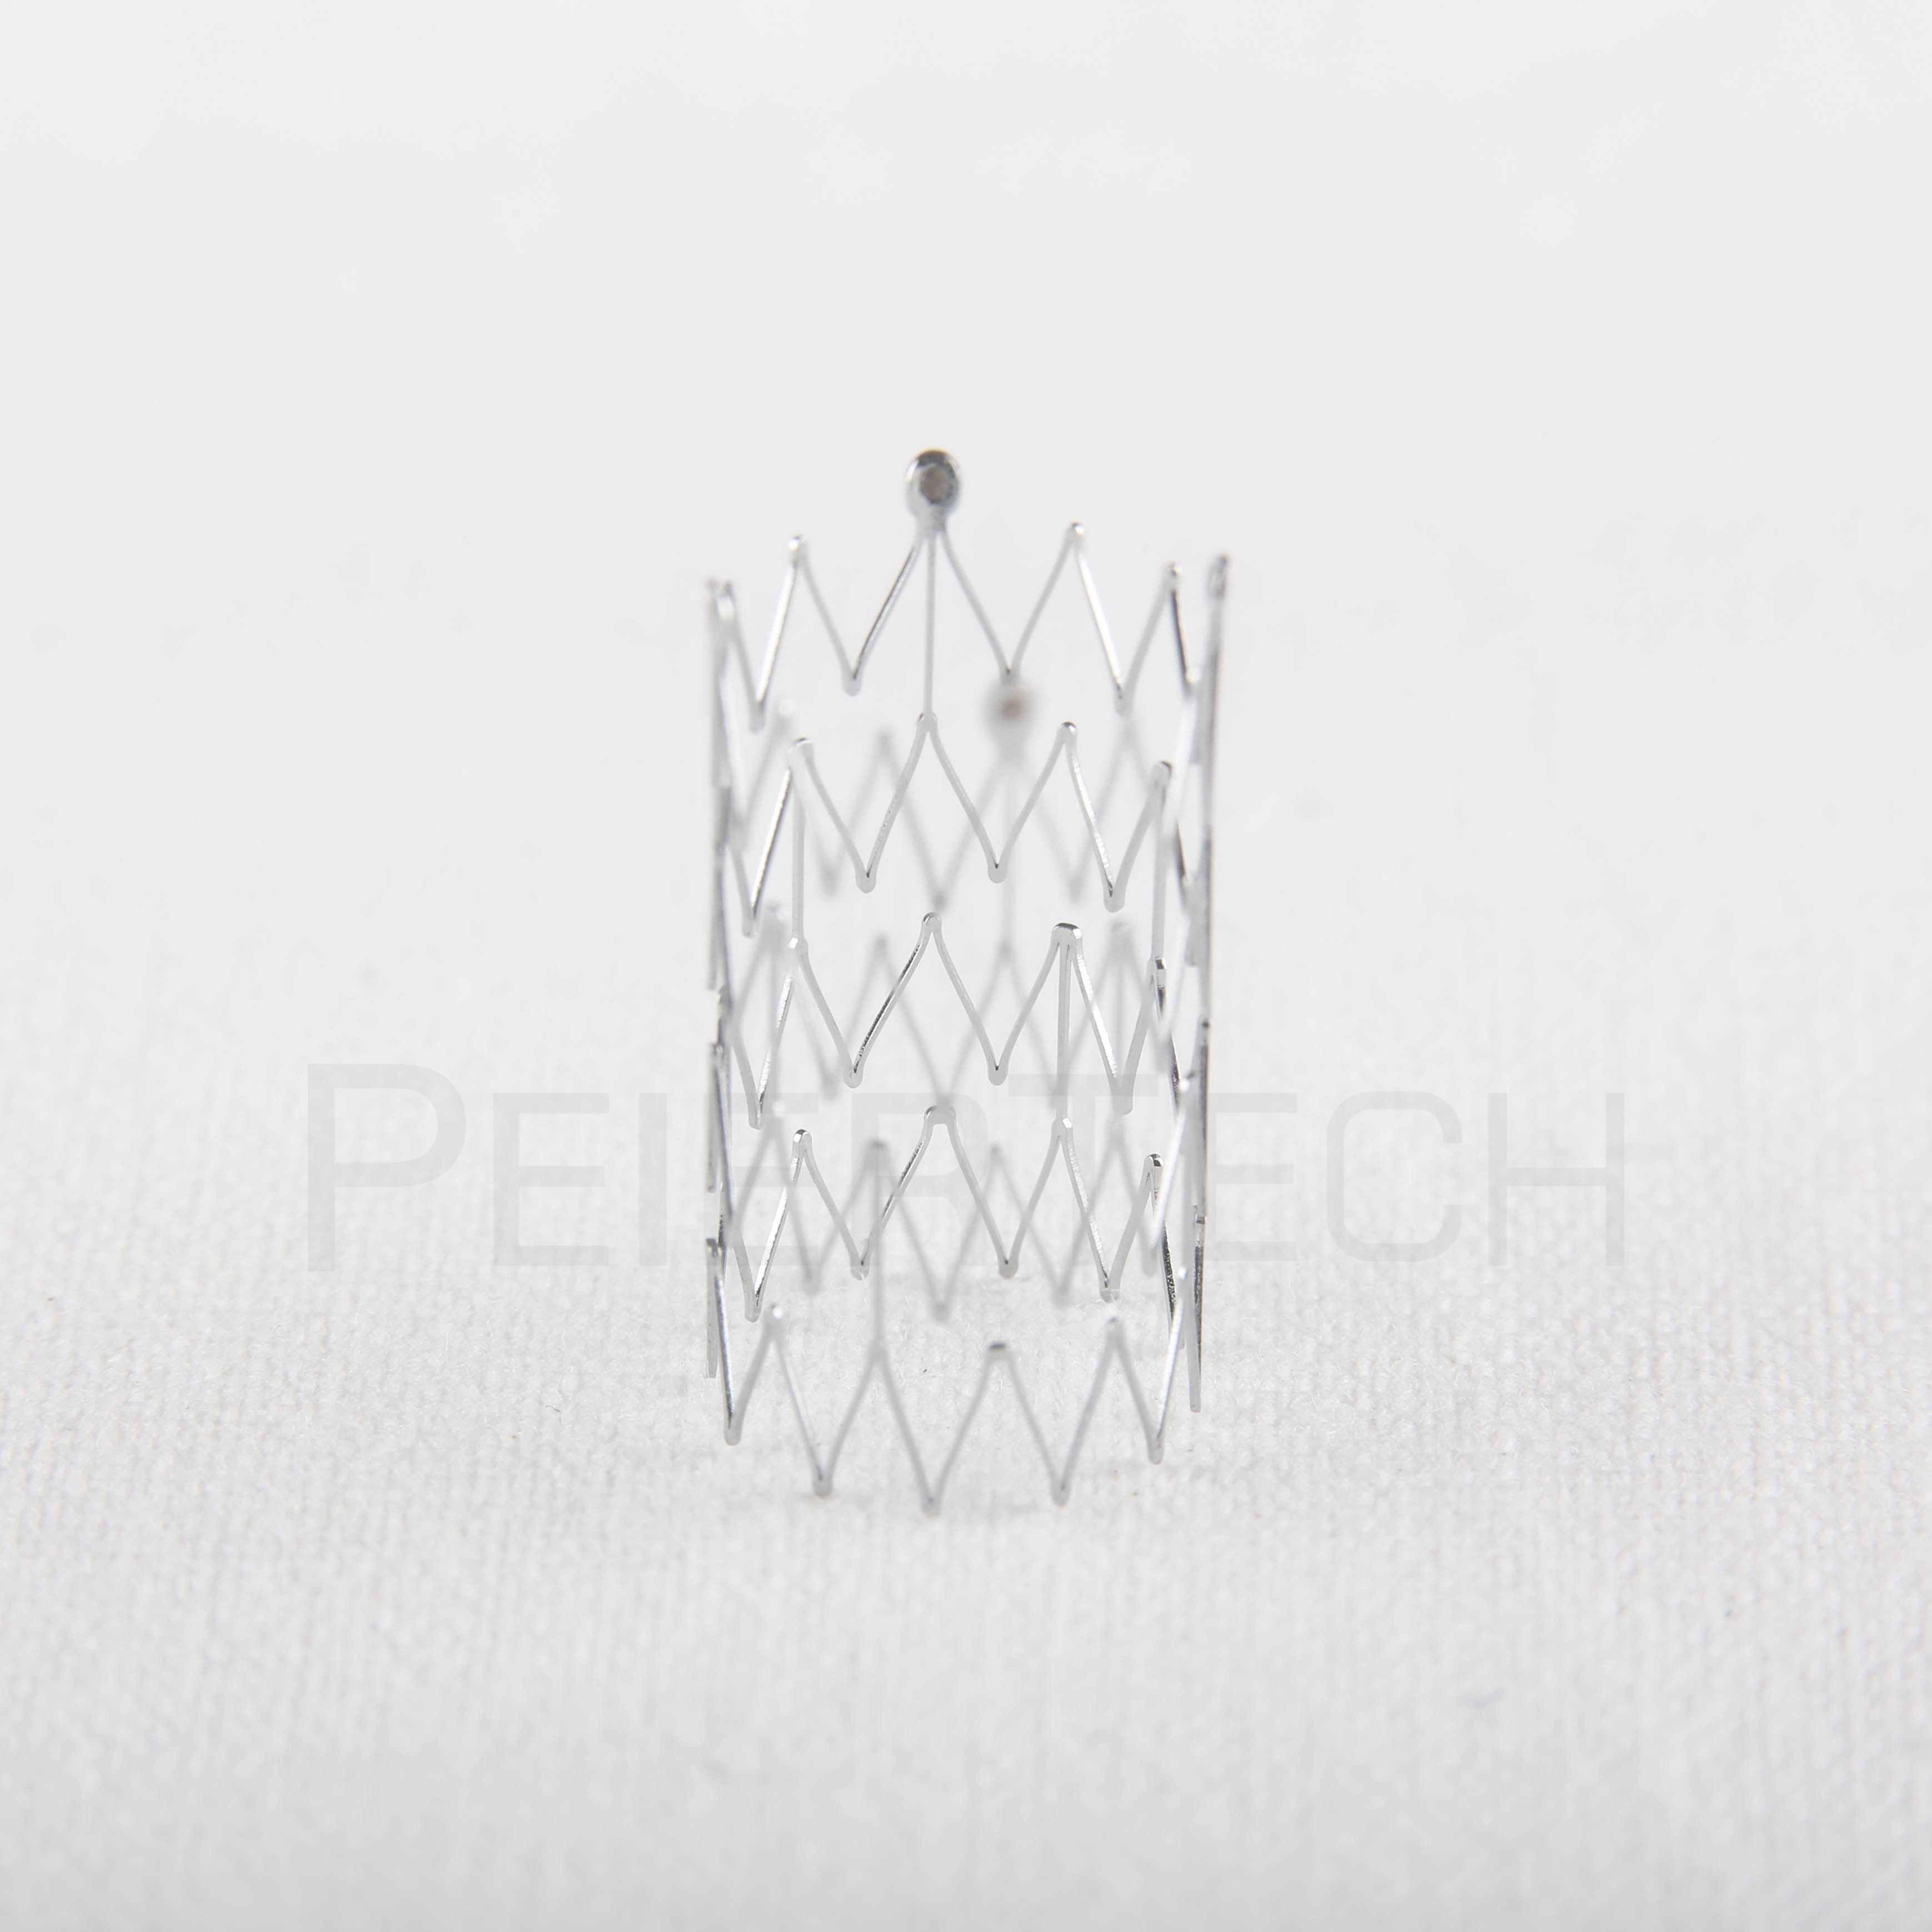 Nitinol Component Nitinol Devices Peiertech has been a reliable OEM supplier for 20 years, providing turn-key manufacturing